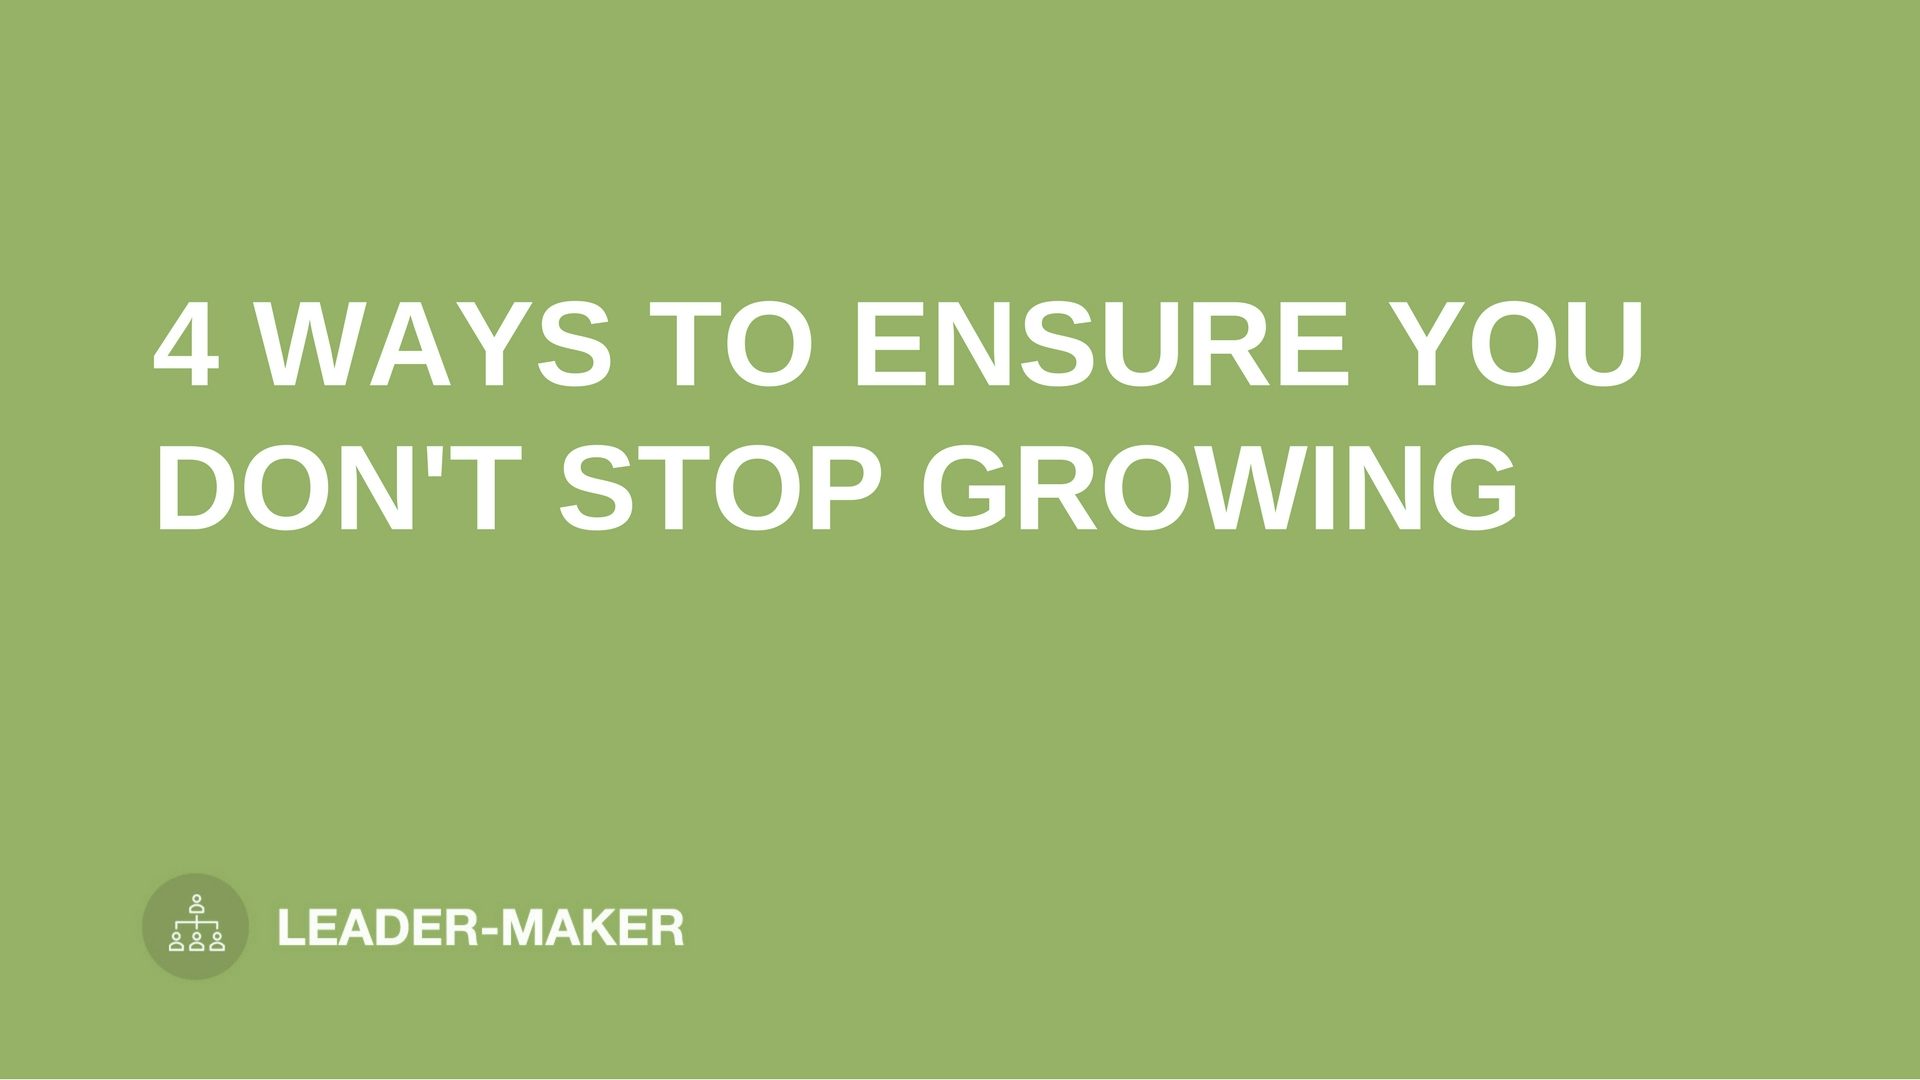 text "4 WAYS TO ENSURE YOU DON'T STOP GROWING" on green background leaders.church